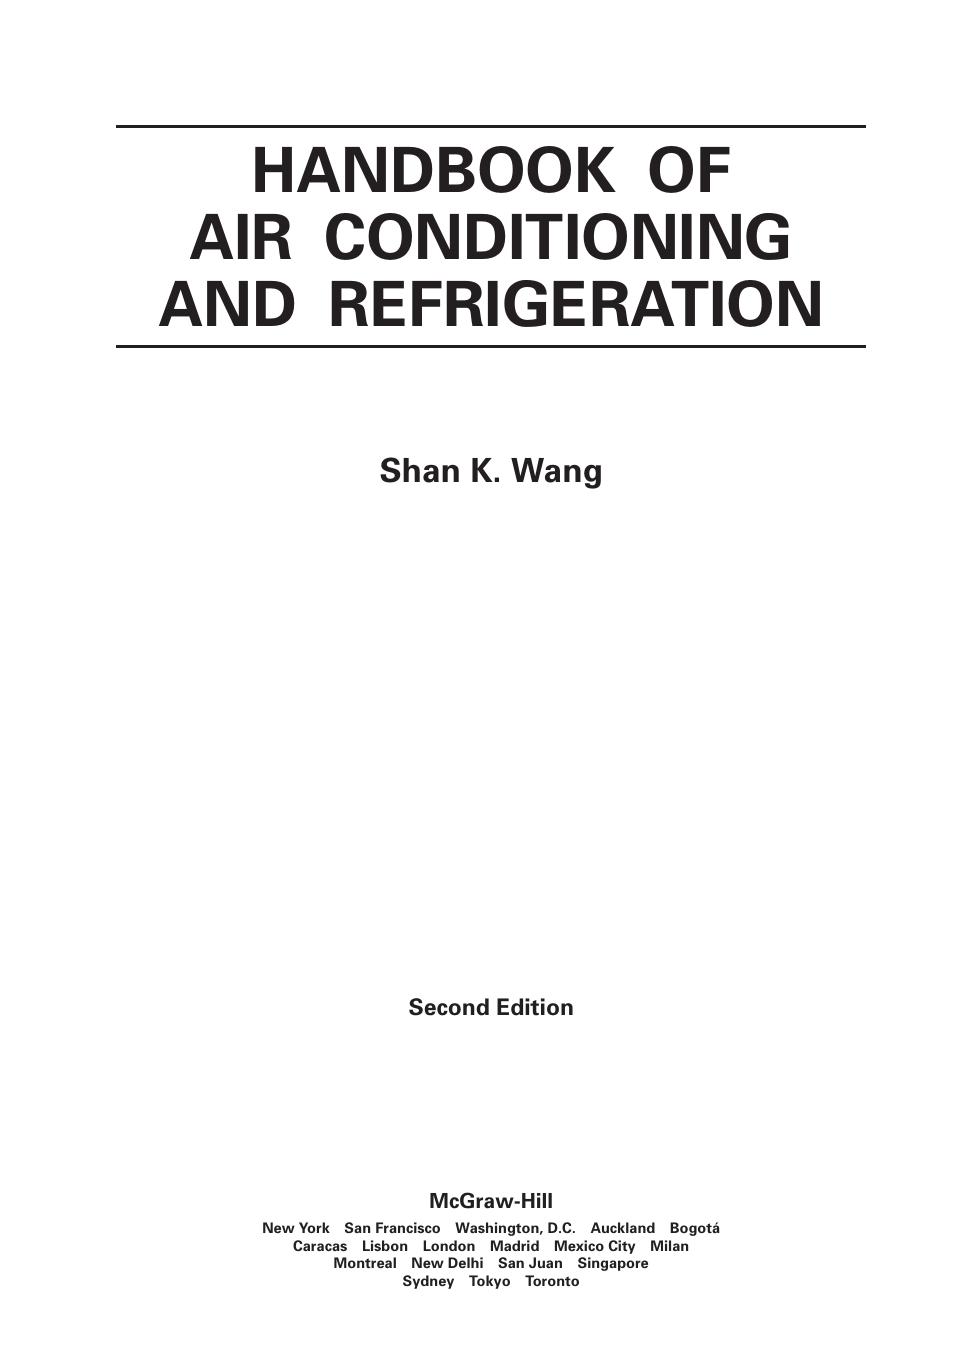 S. K. Wang - Handbook of Air Conditioning and Refrigeration by 2nd Edition